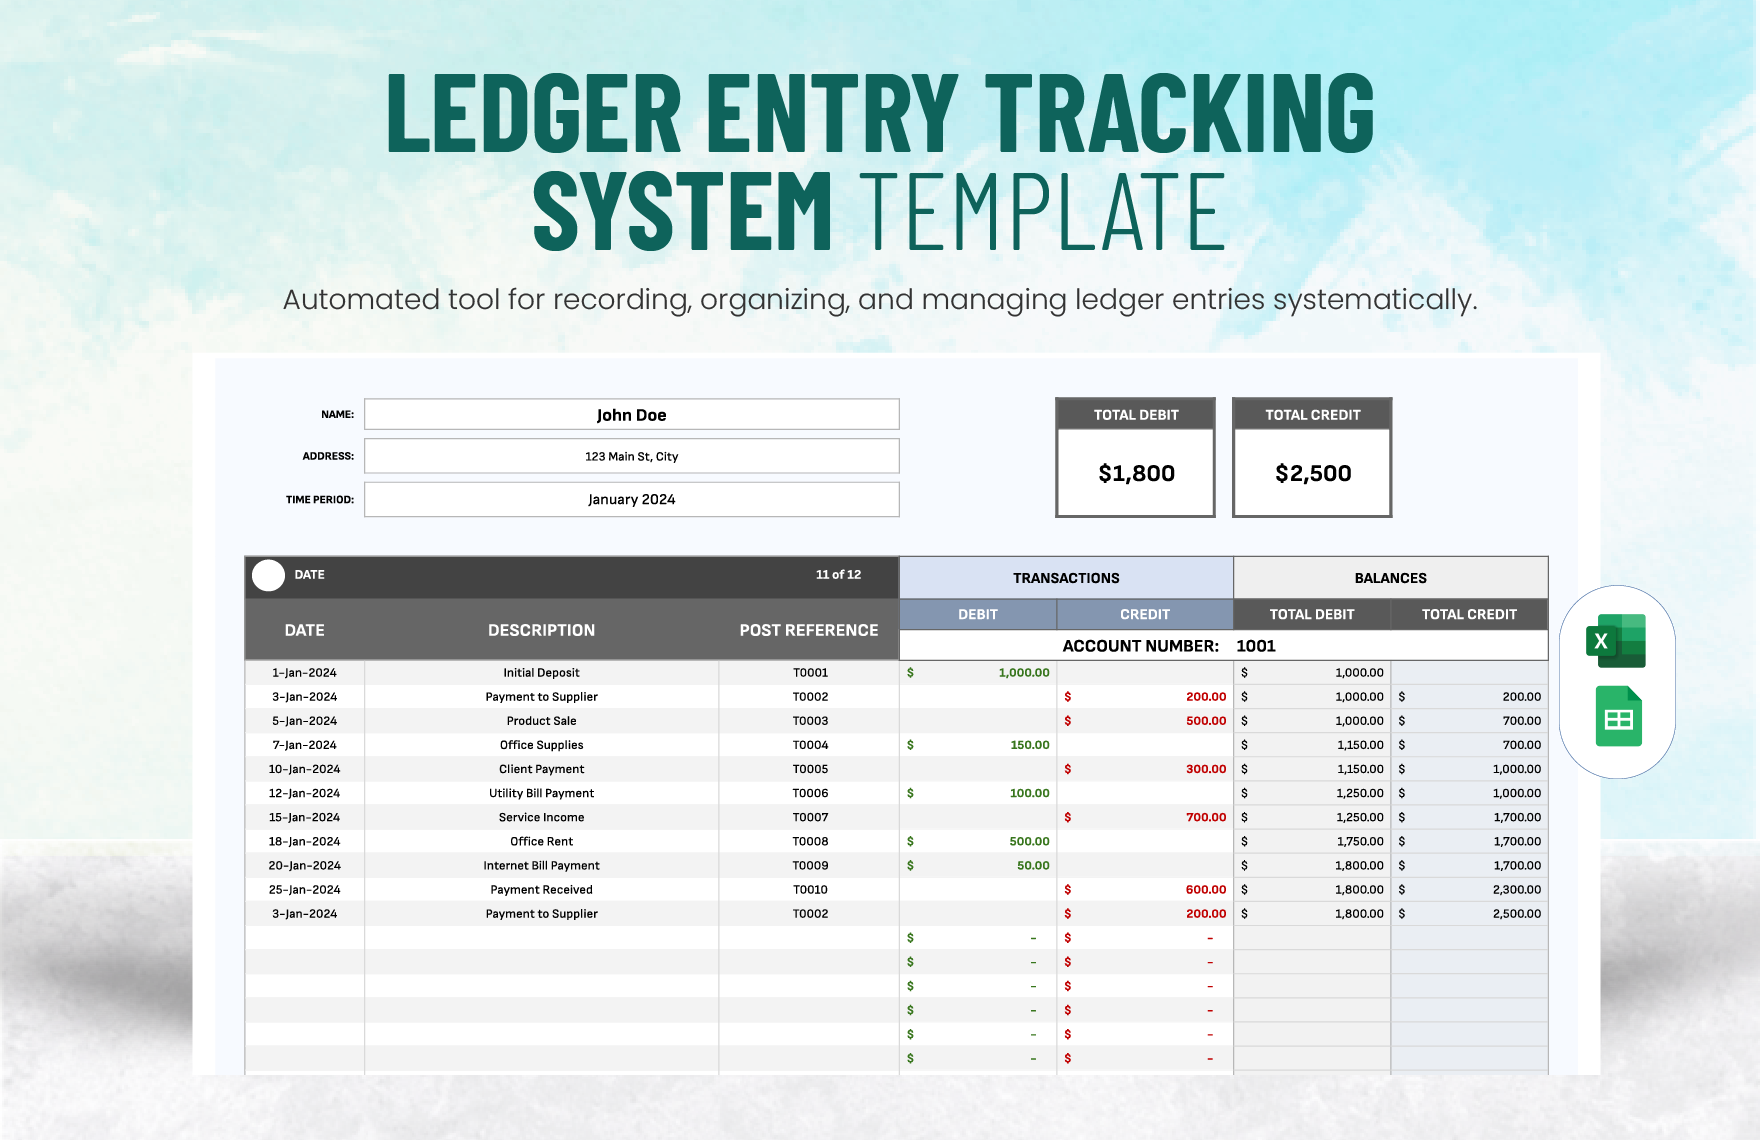 Ledger Entry Tracking System Template in Excel, Google Sheets